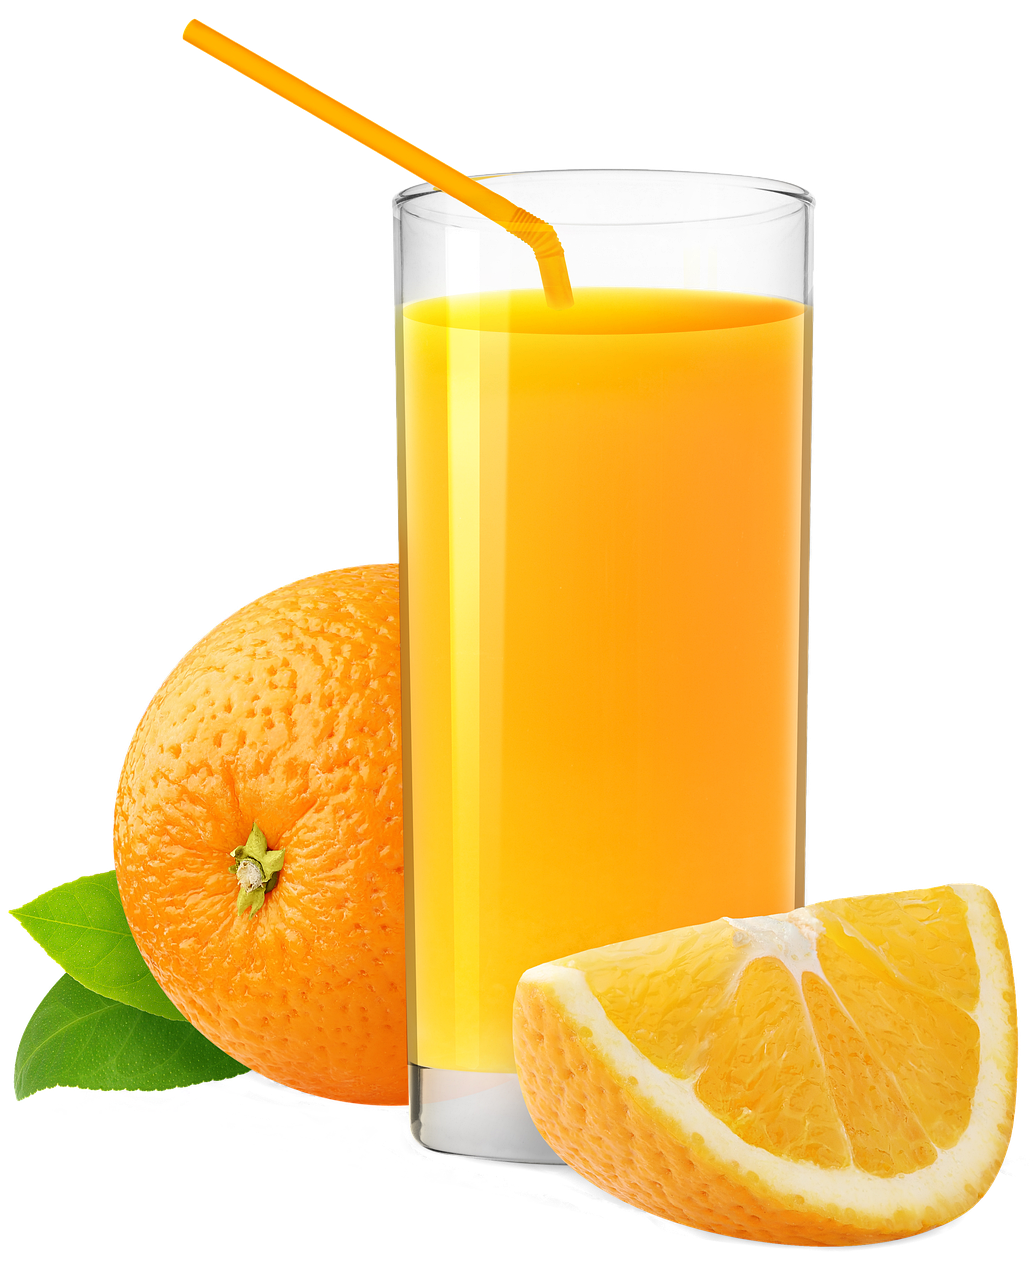 How much is a cup orange juice? 